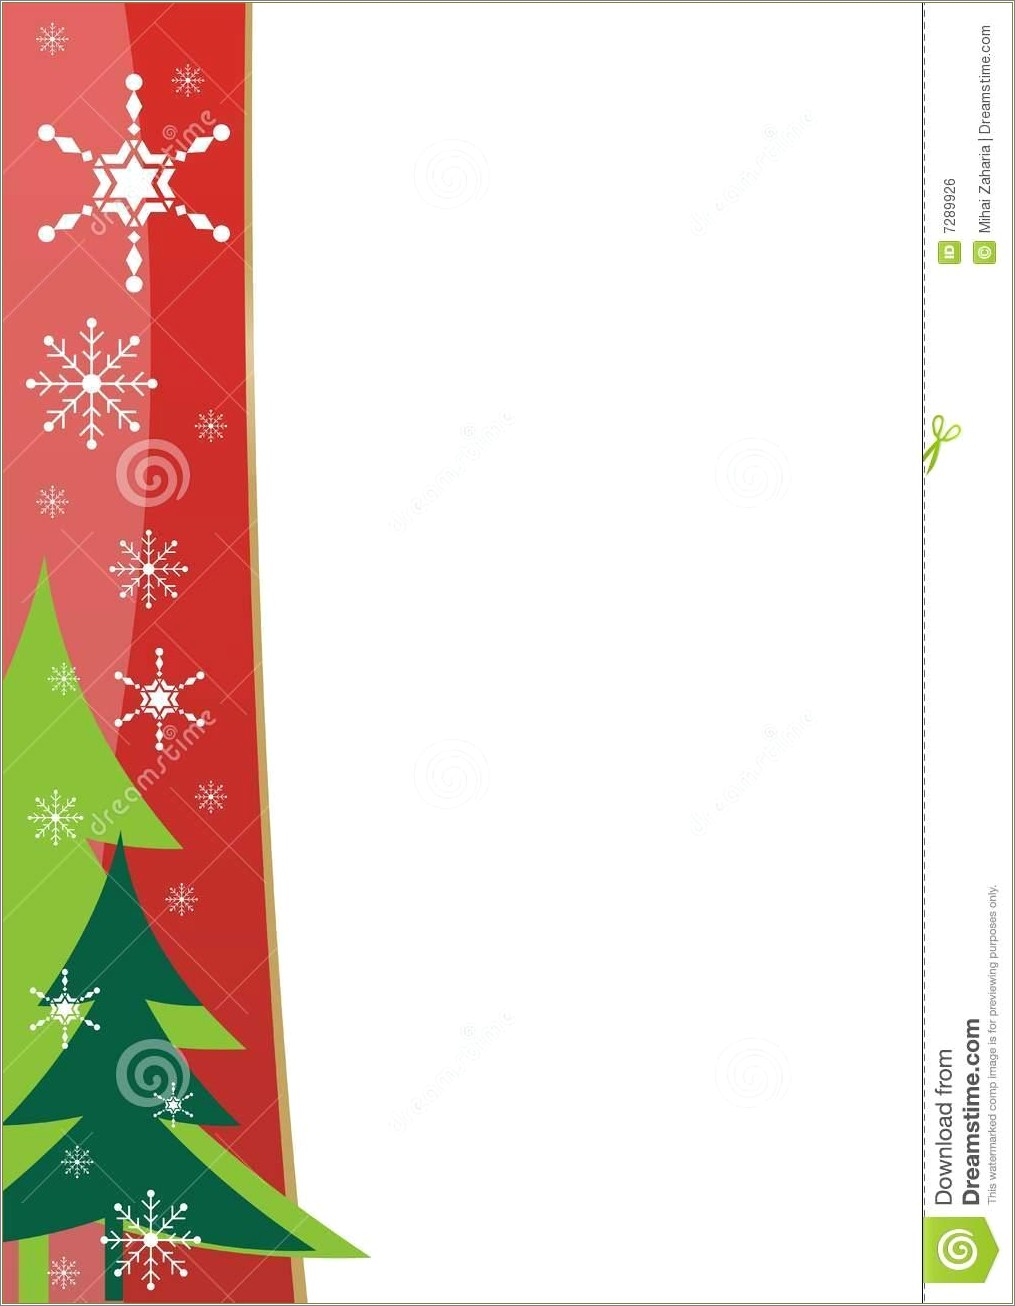 Free Animated Christmas Templates For Powerpoint